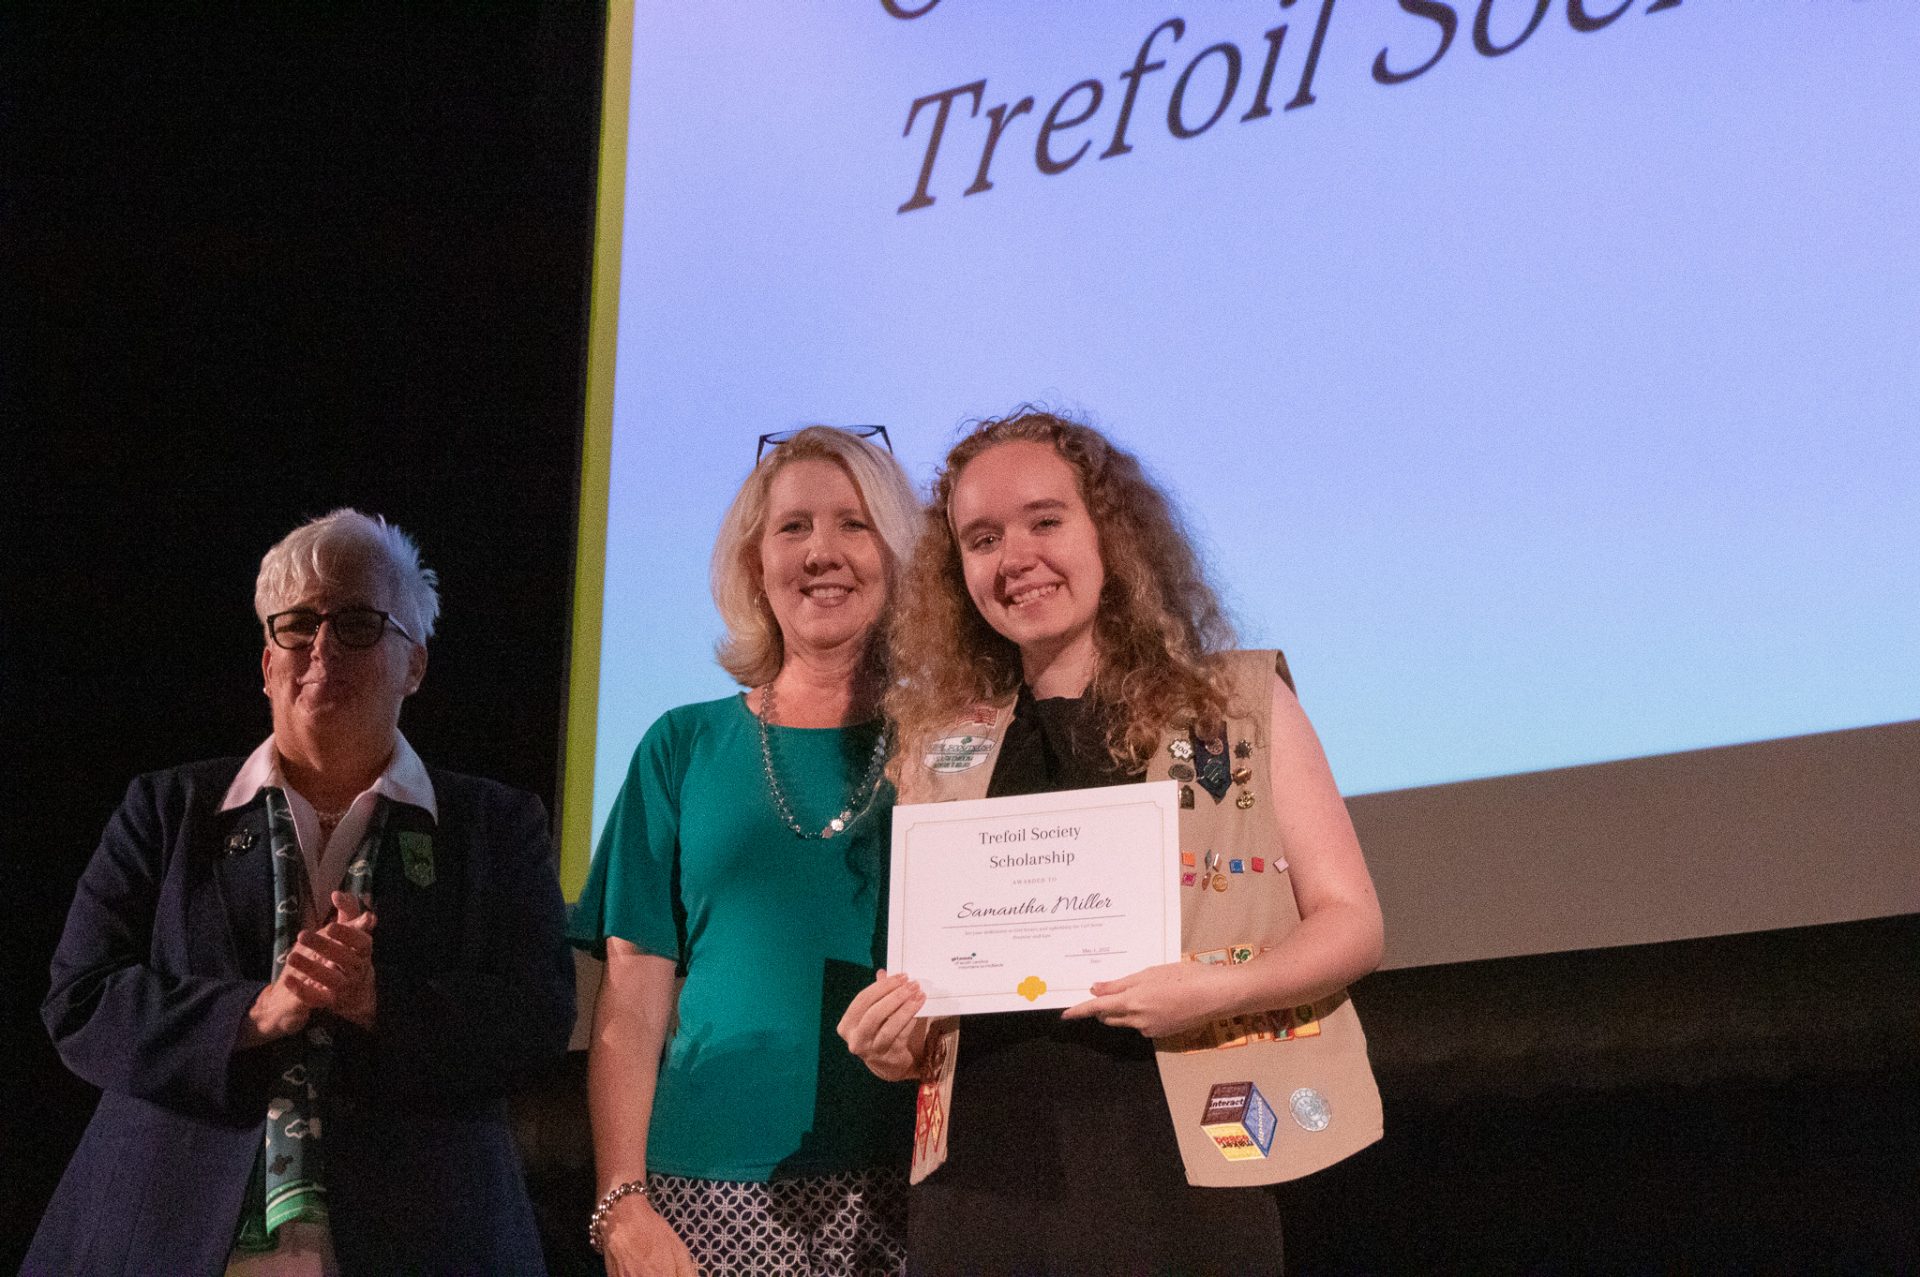 Frances Griggs, board chair, poses with the Trefoil Society Scholarship recipient